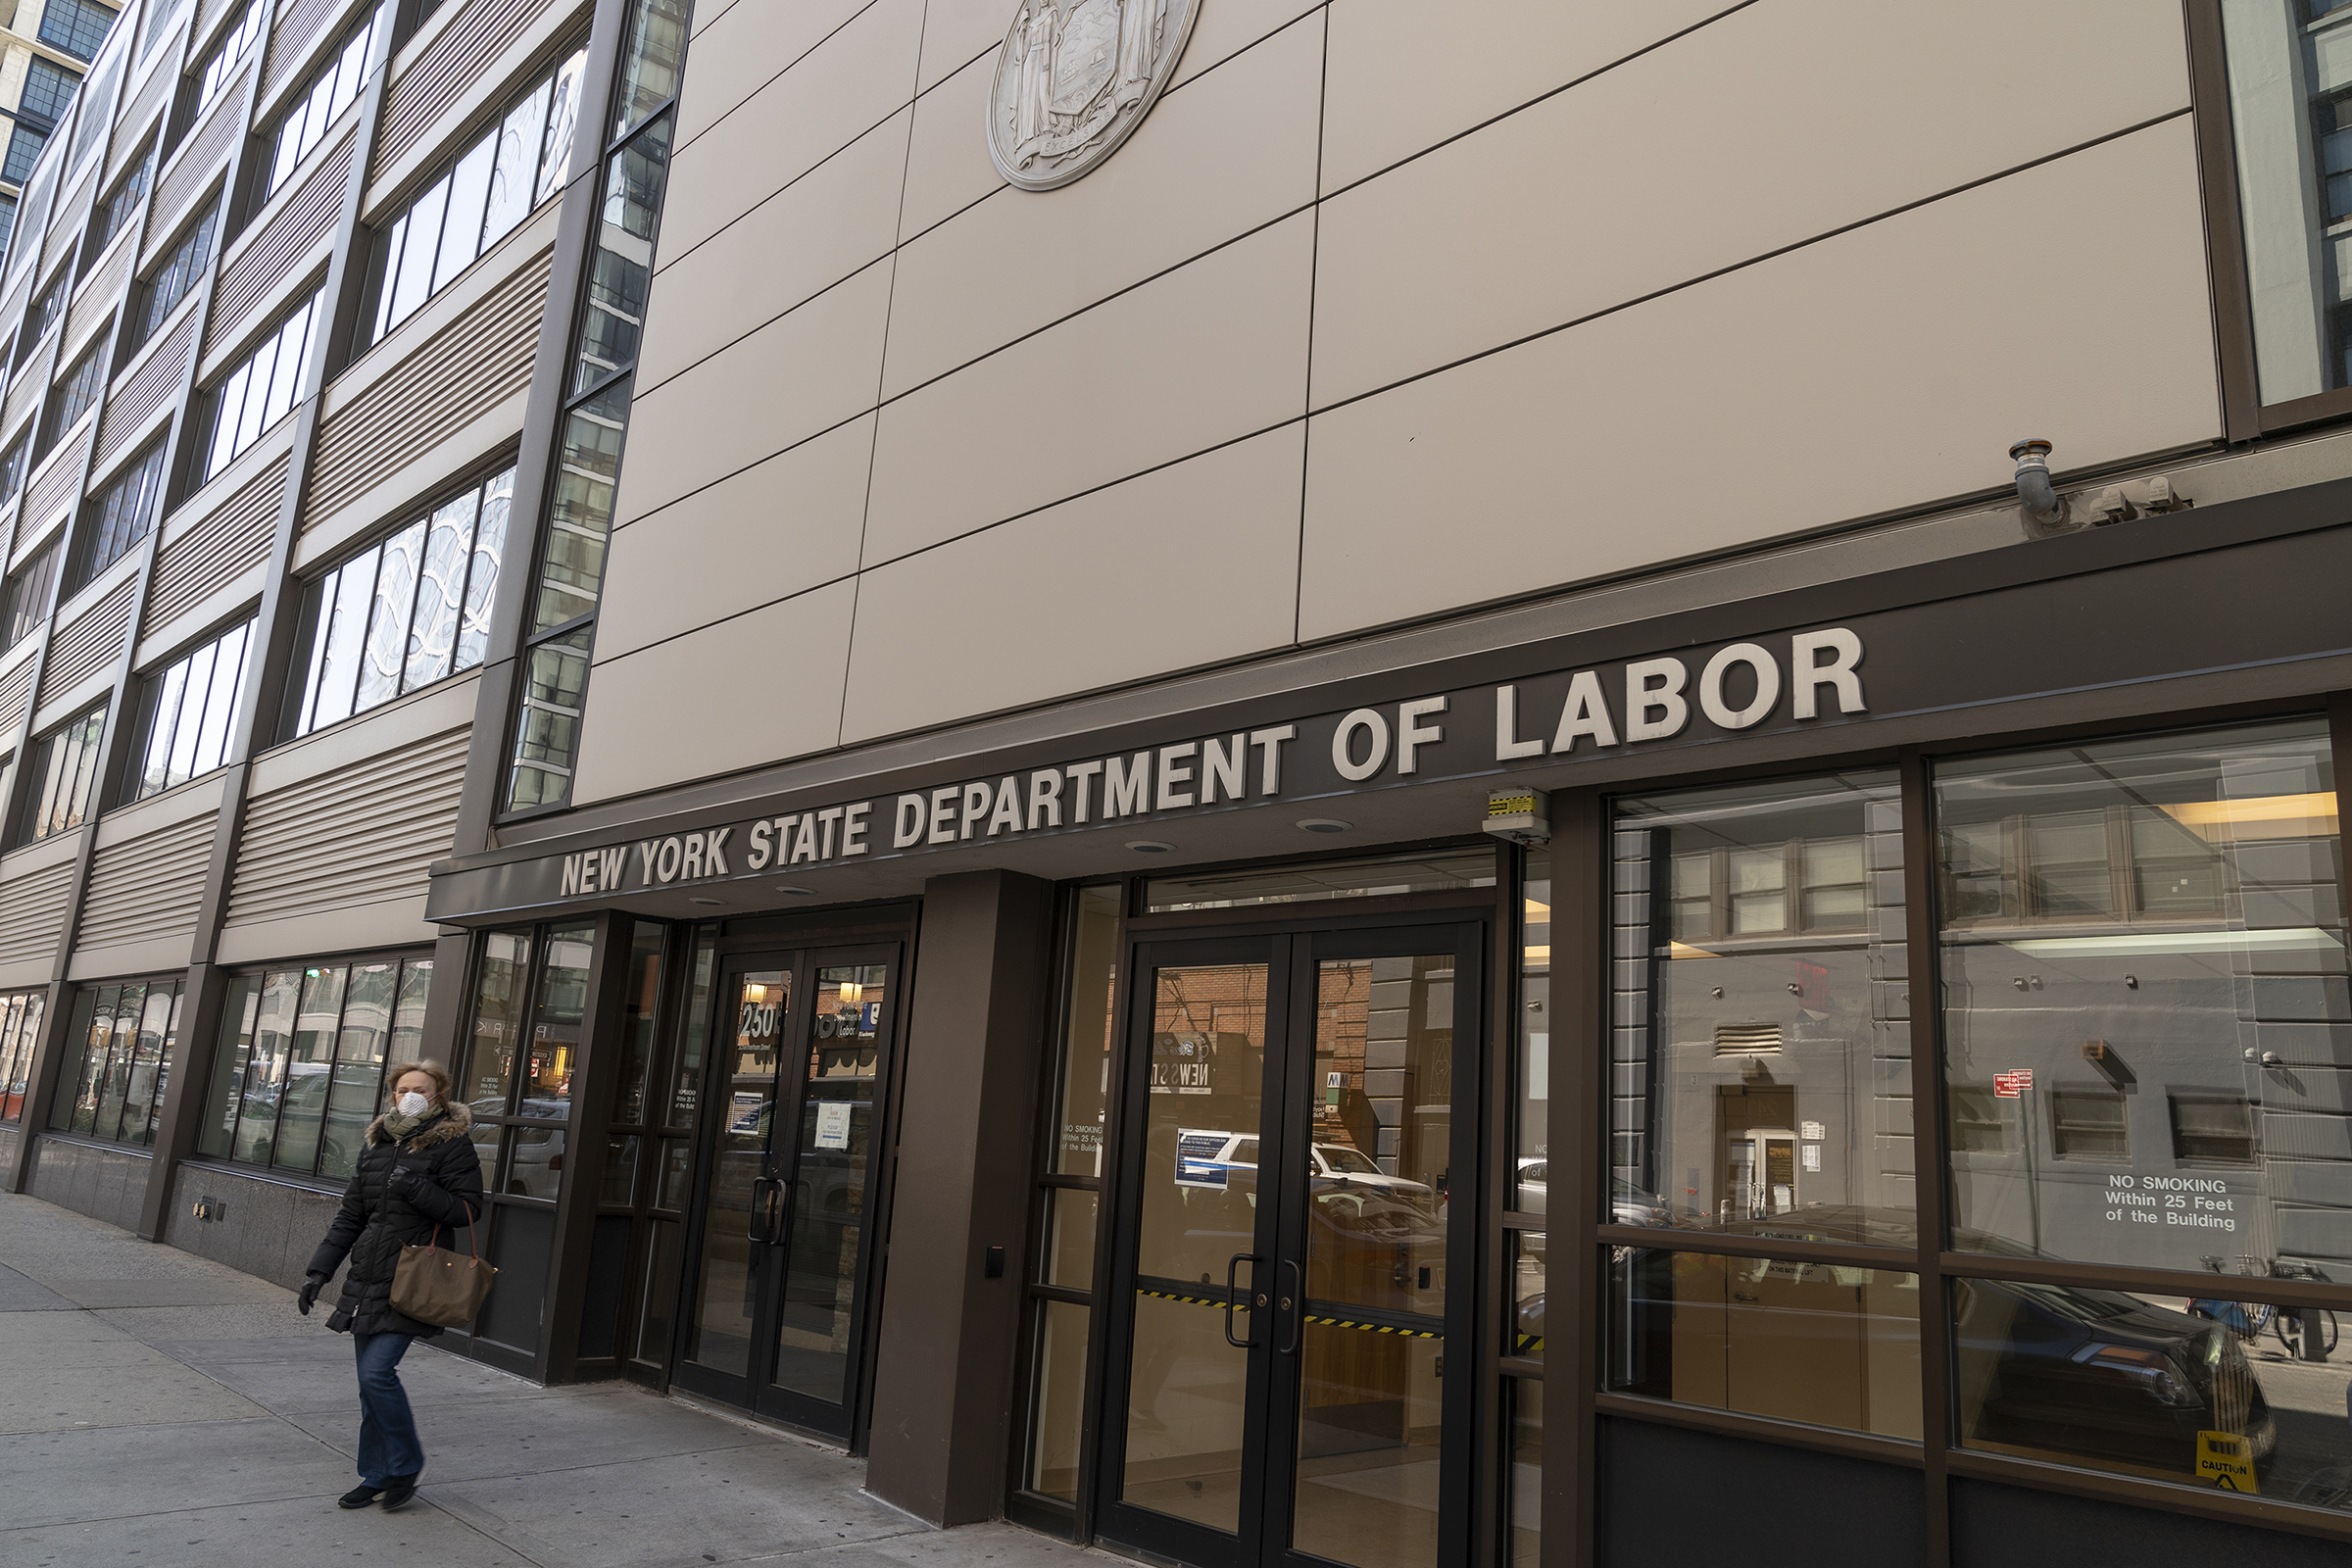 Brooklyn office of the NYS Department of Labor, seen on March 26, 2020. (Lev Radin—Pacific Press/LightRocket via Getty Images)